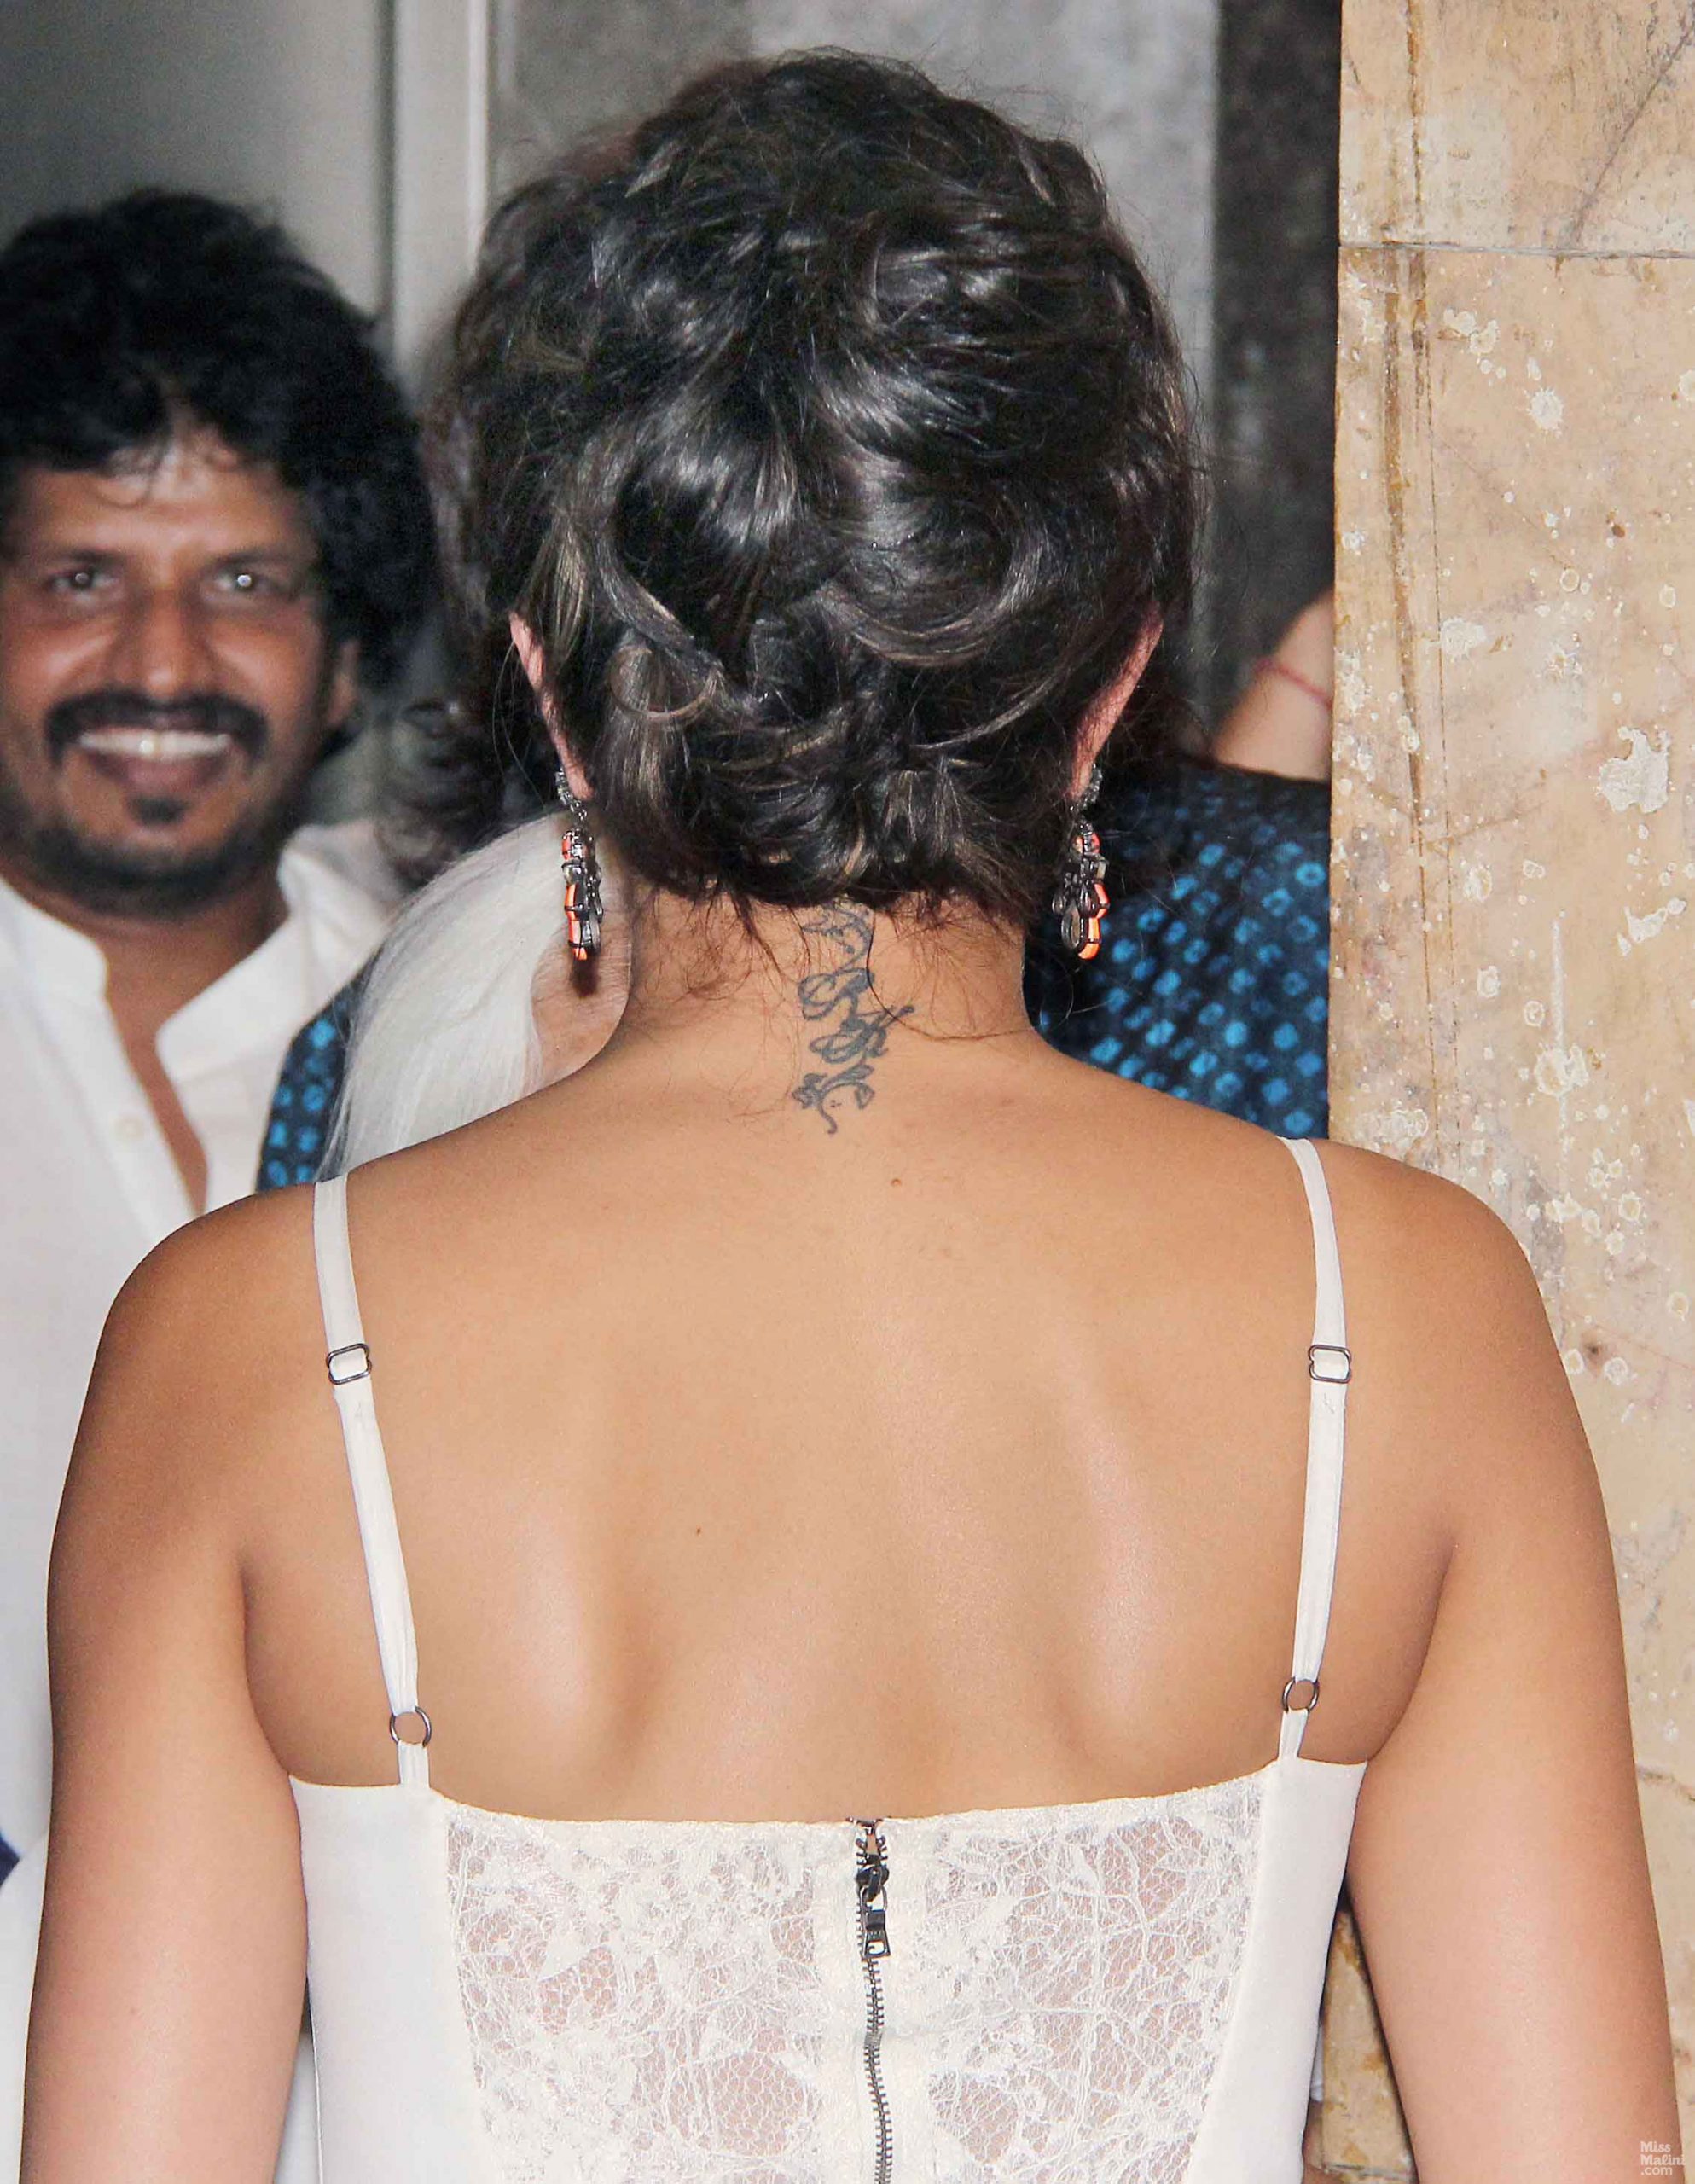 What will Deepika do with her 'RK' tattoo? - Masala